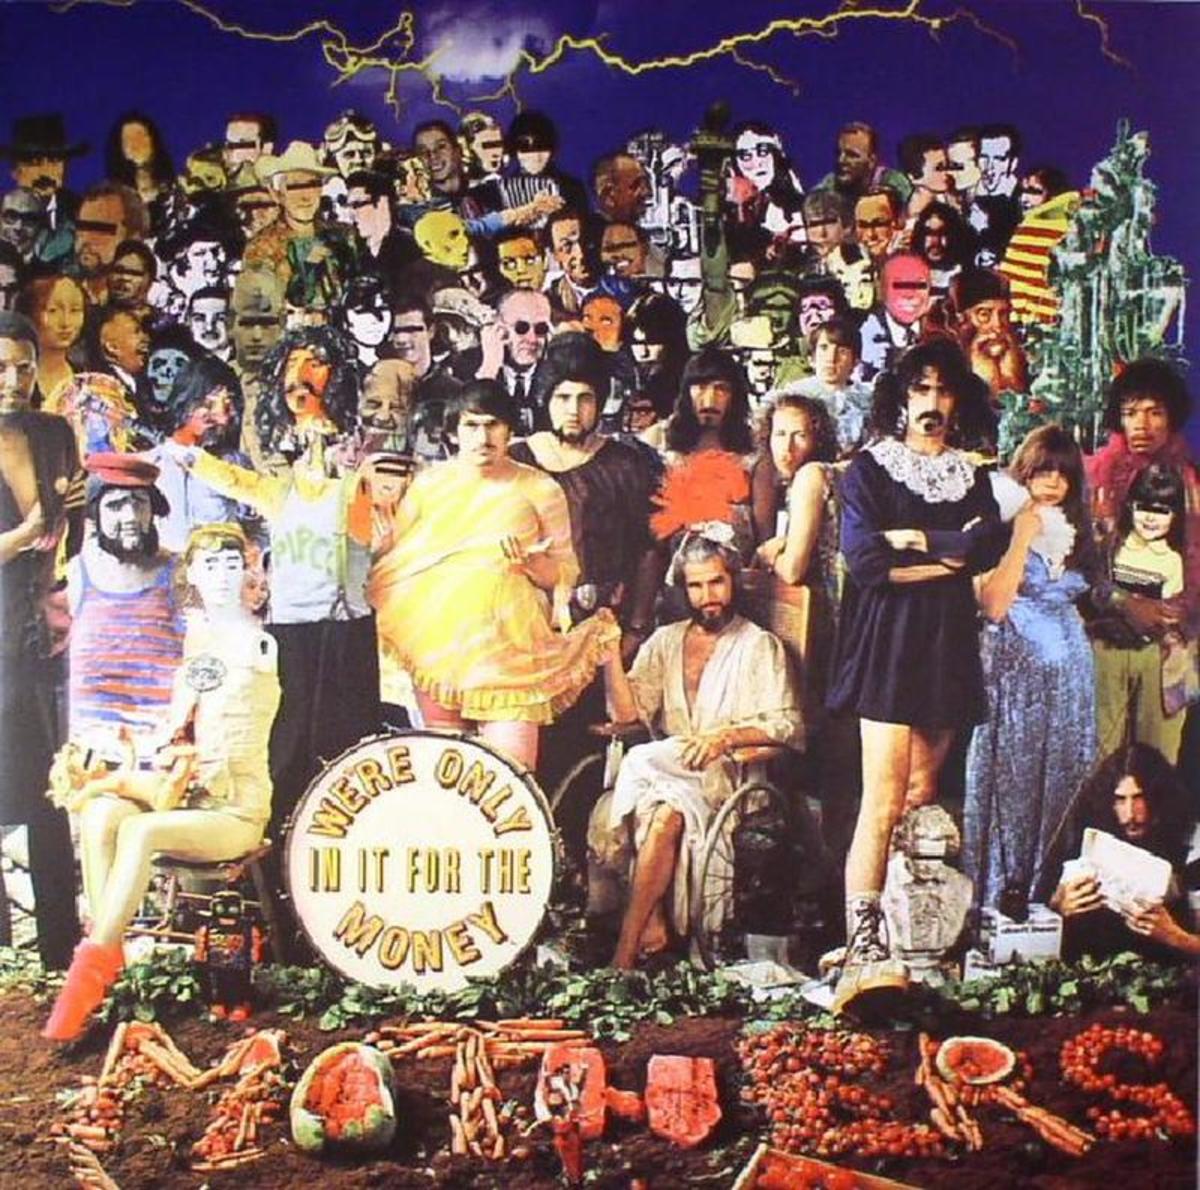 Album cover for "We're Only in It for the Money" by The Mothers of Invention